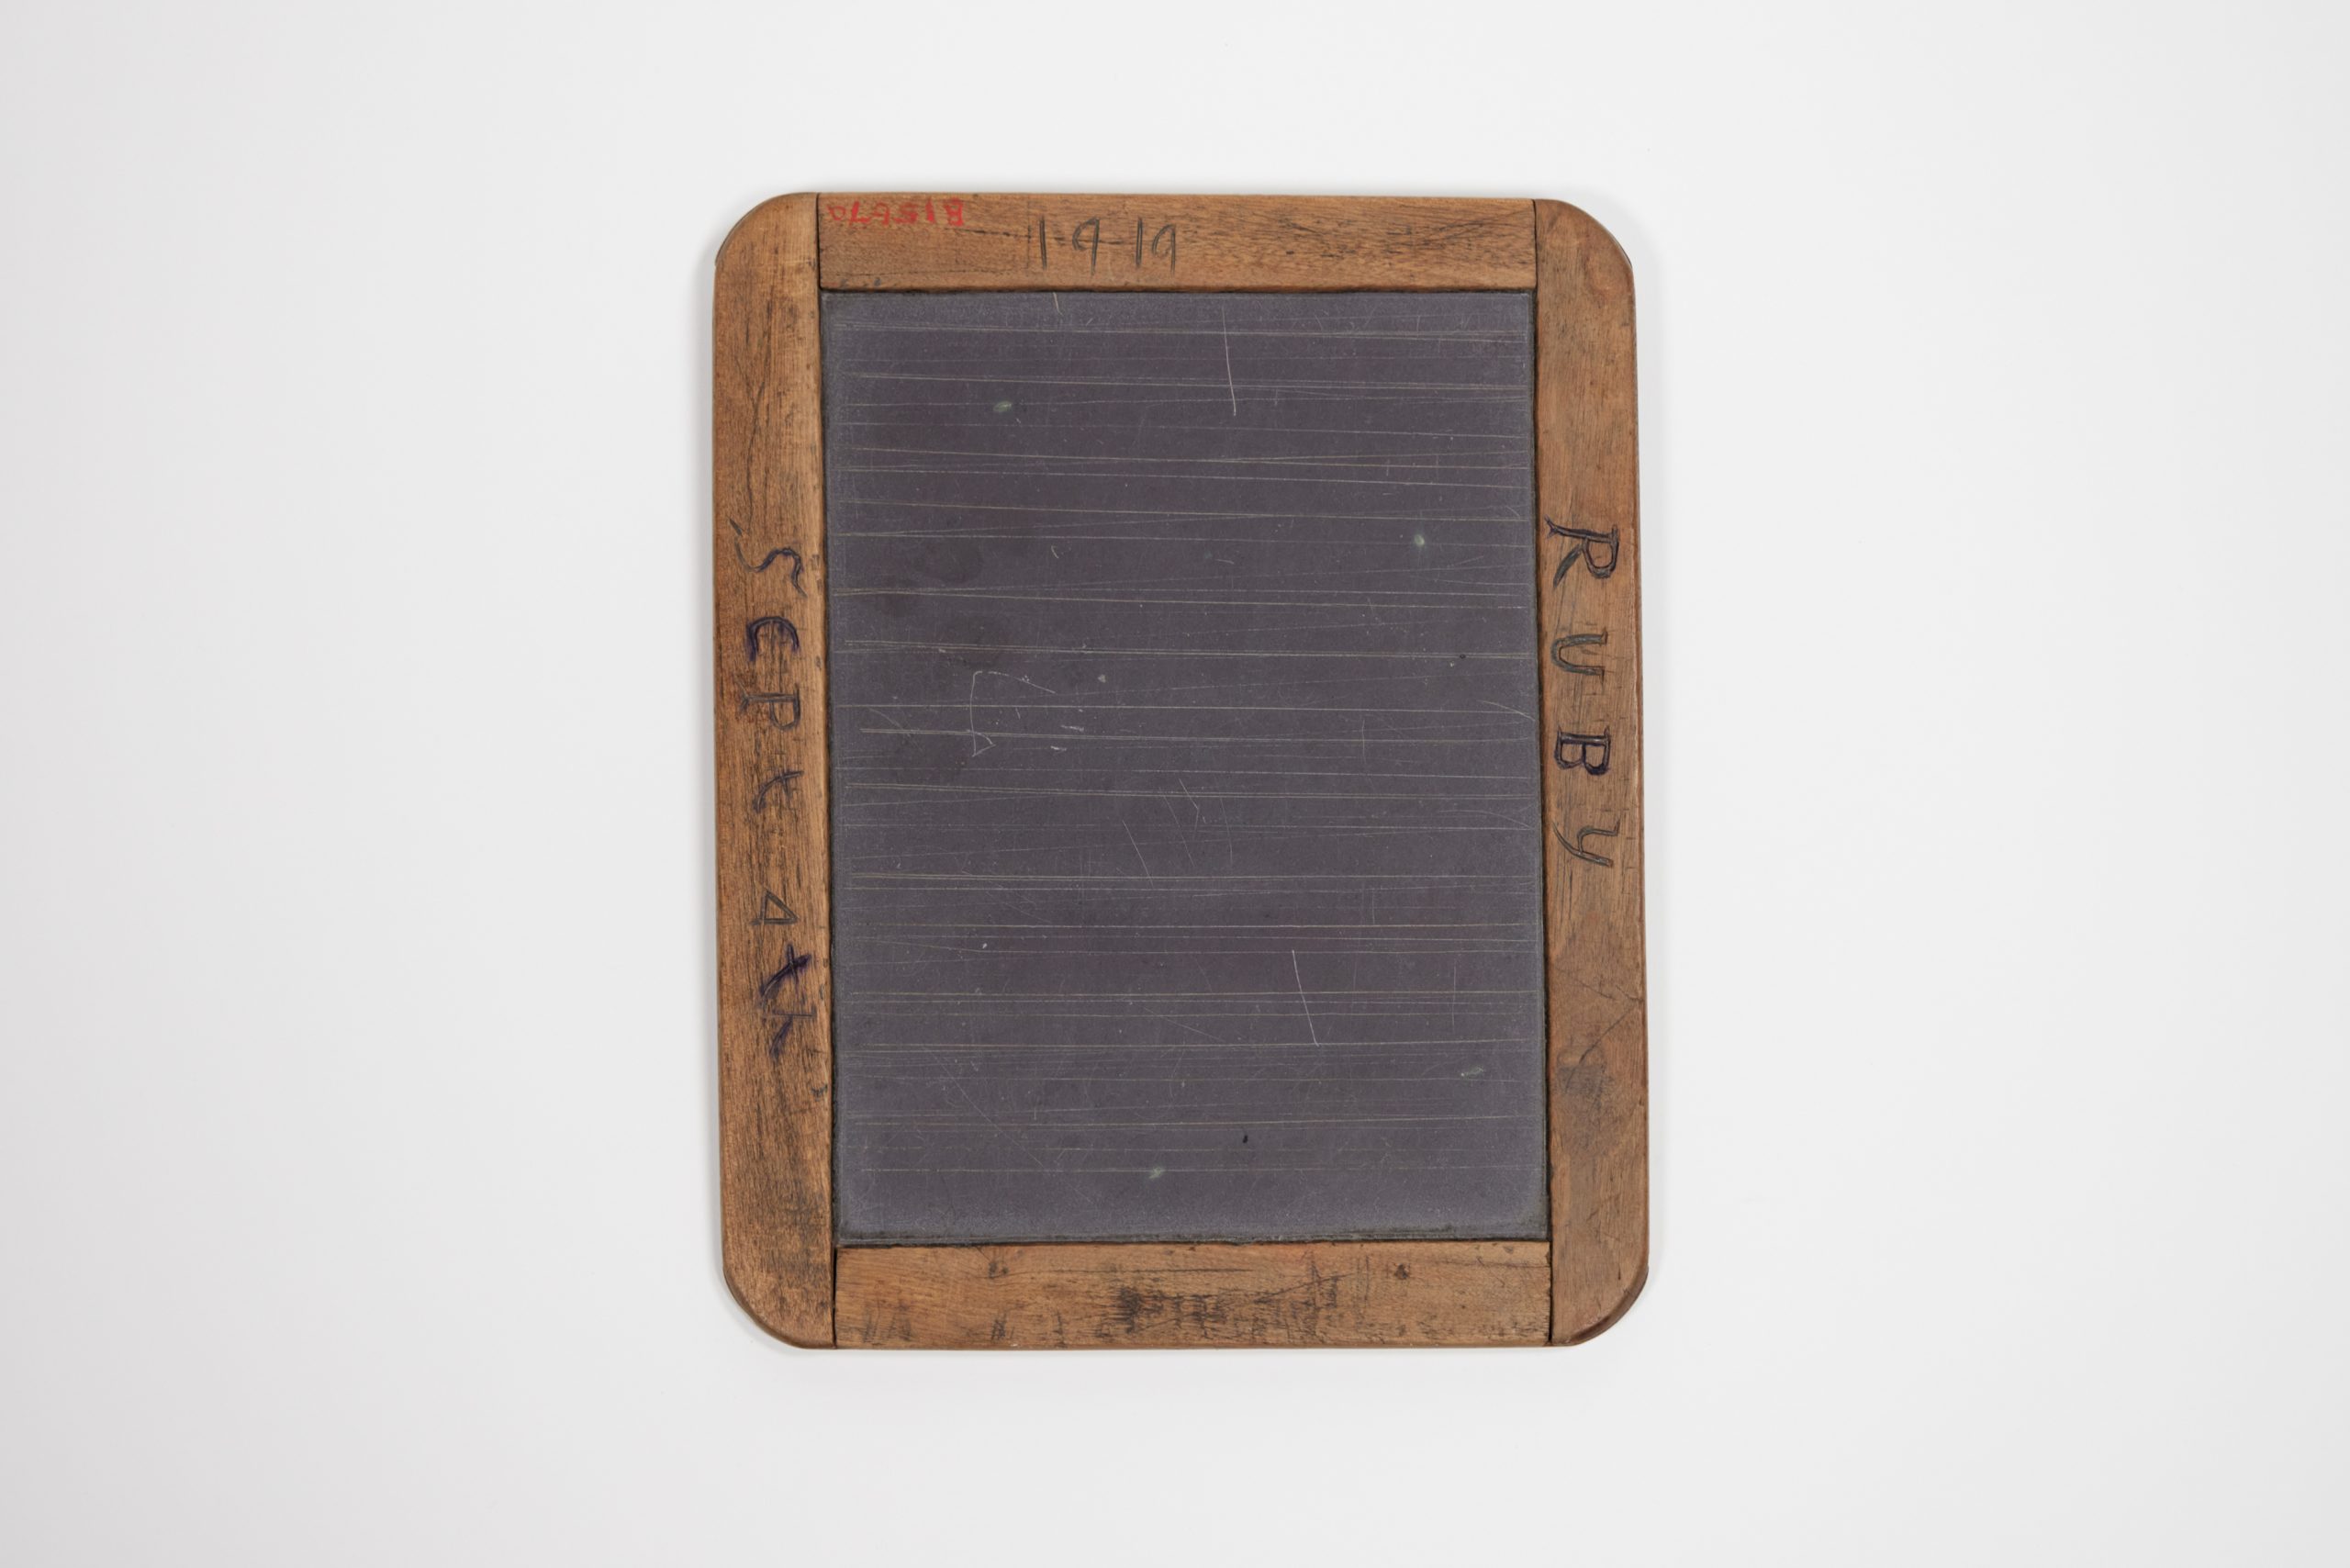 Black writing slate which has a wooden frame with curved corners. The frame is inscribed in handwriting saying "RUBY," "1919," and "SCP"